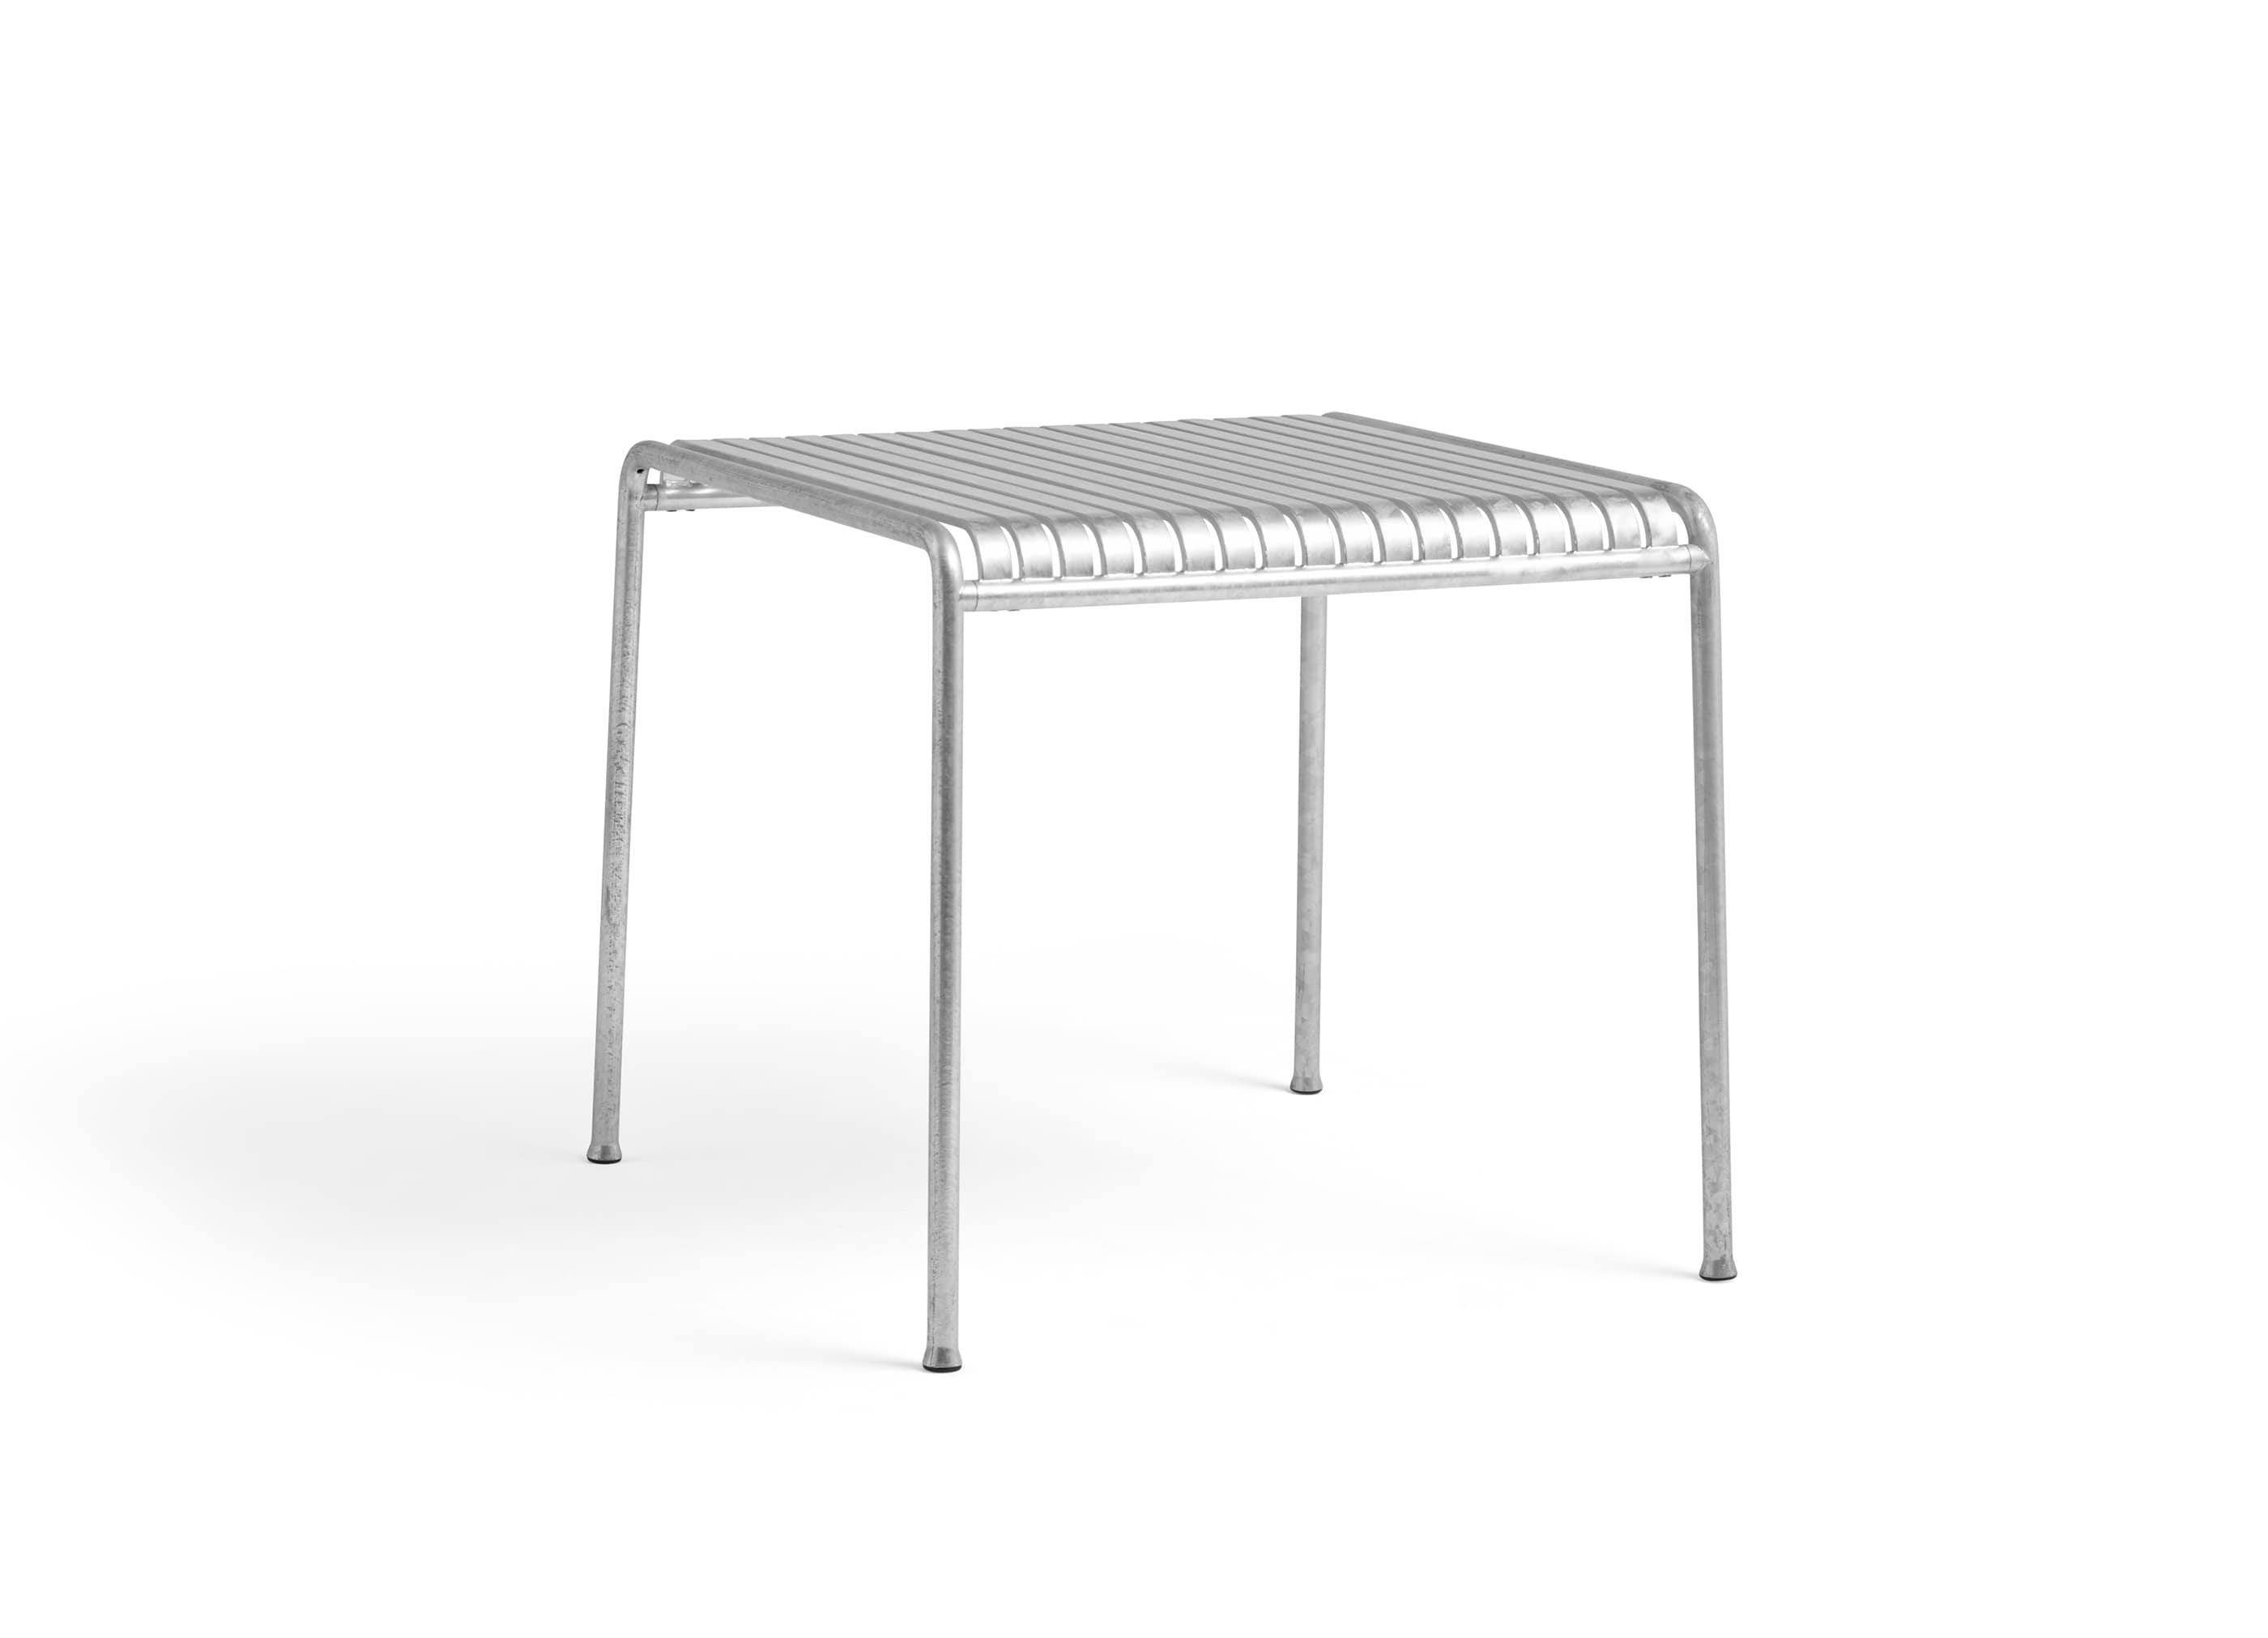 PALISSADE TABLE / L82.5 x W90 - HOT GALVANISED